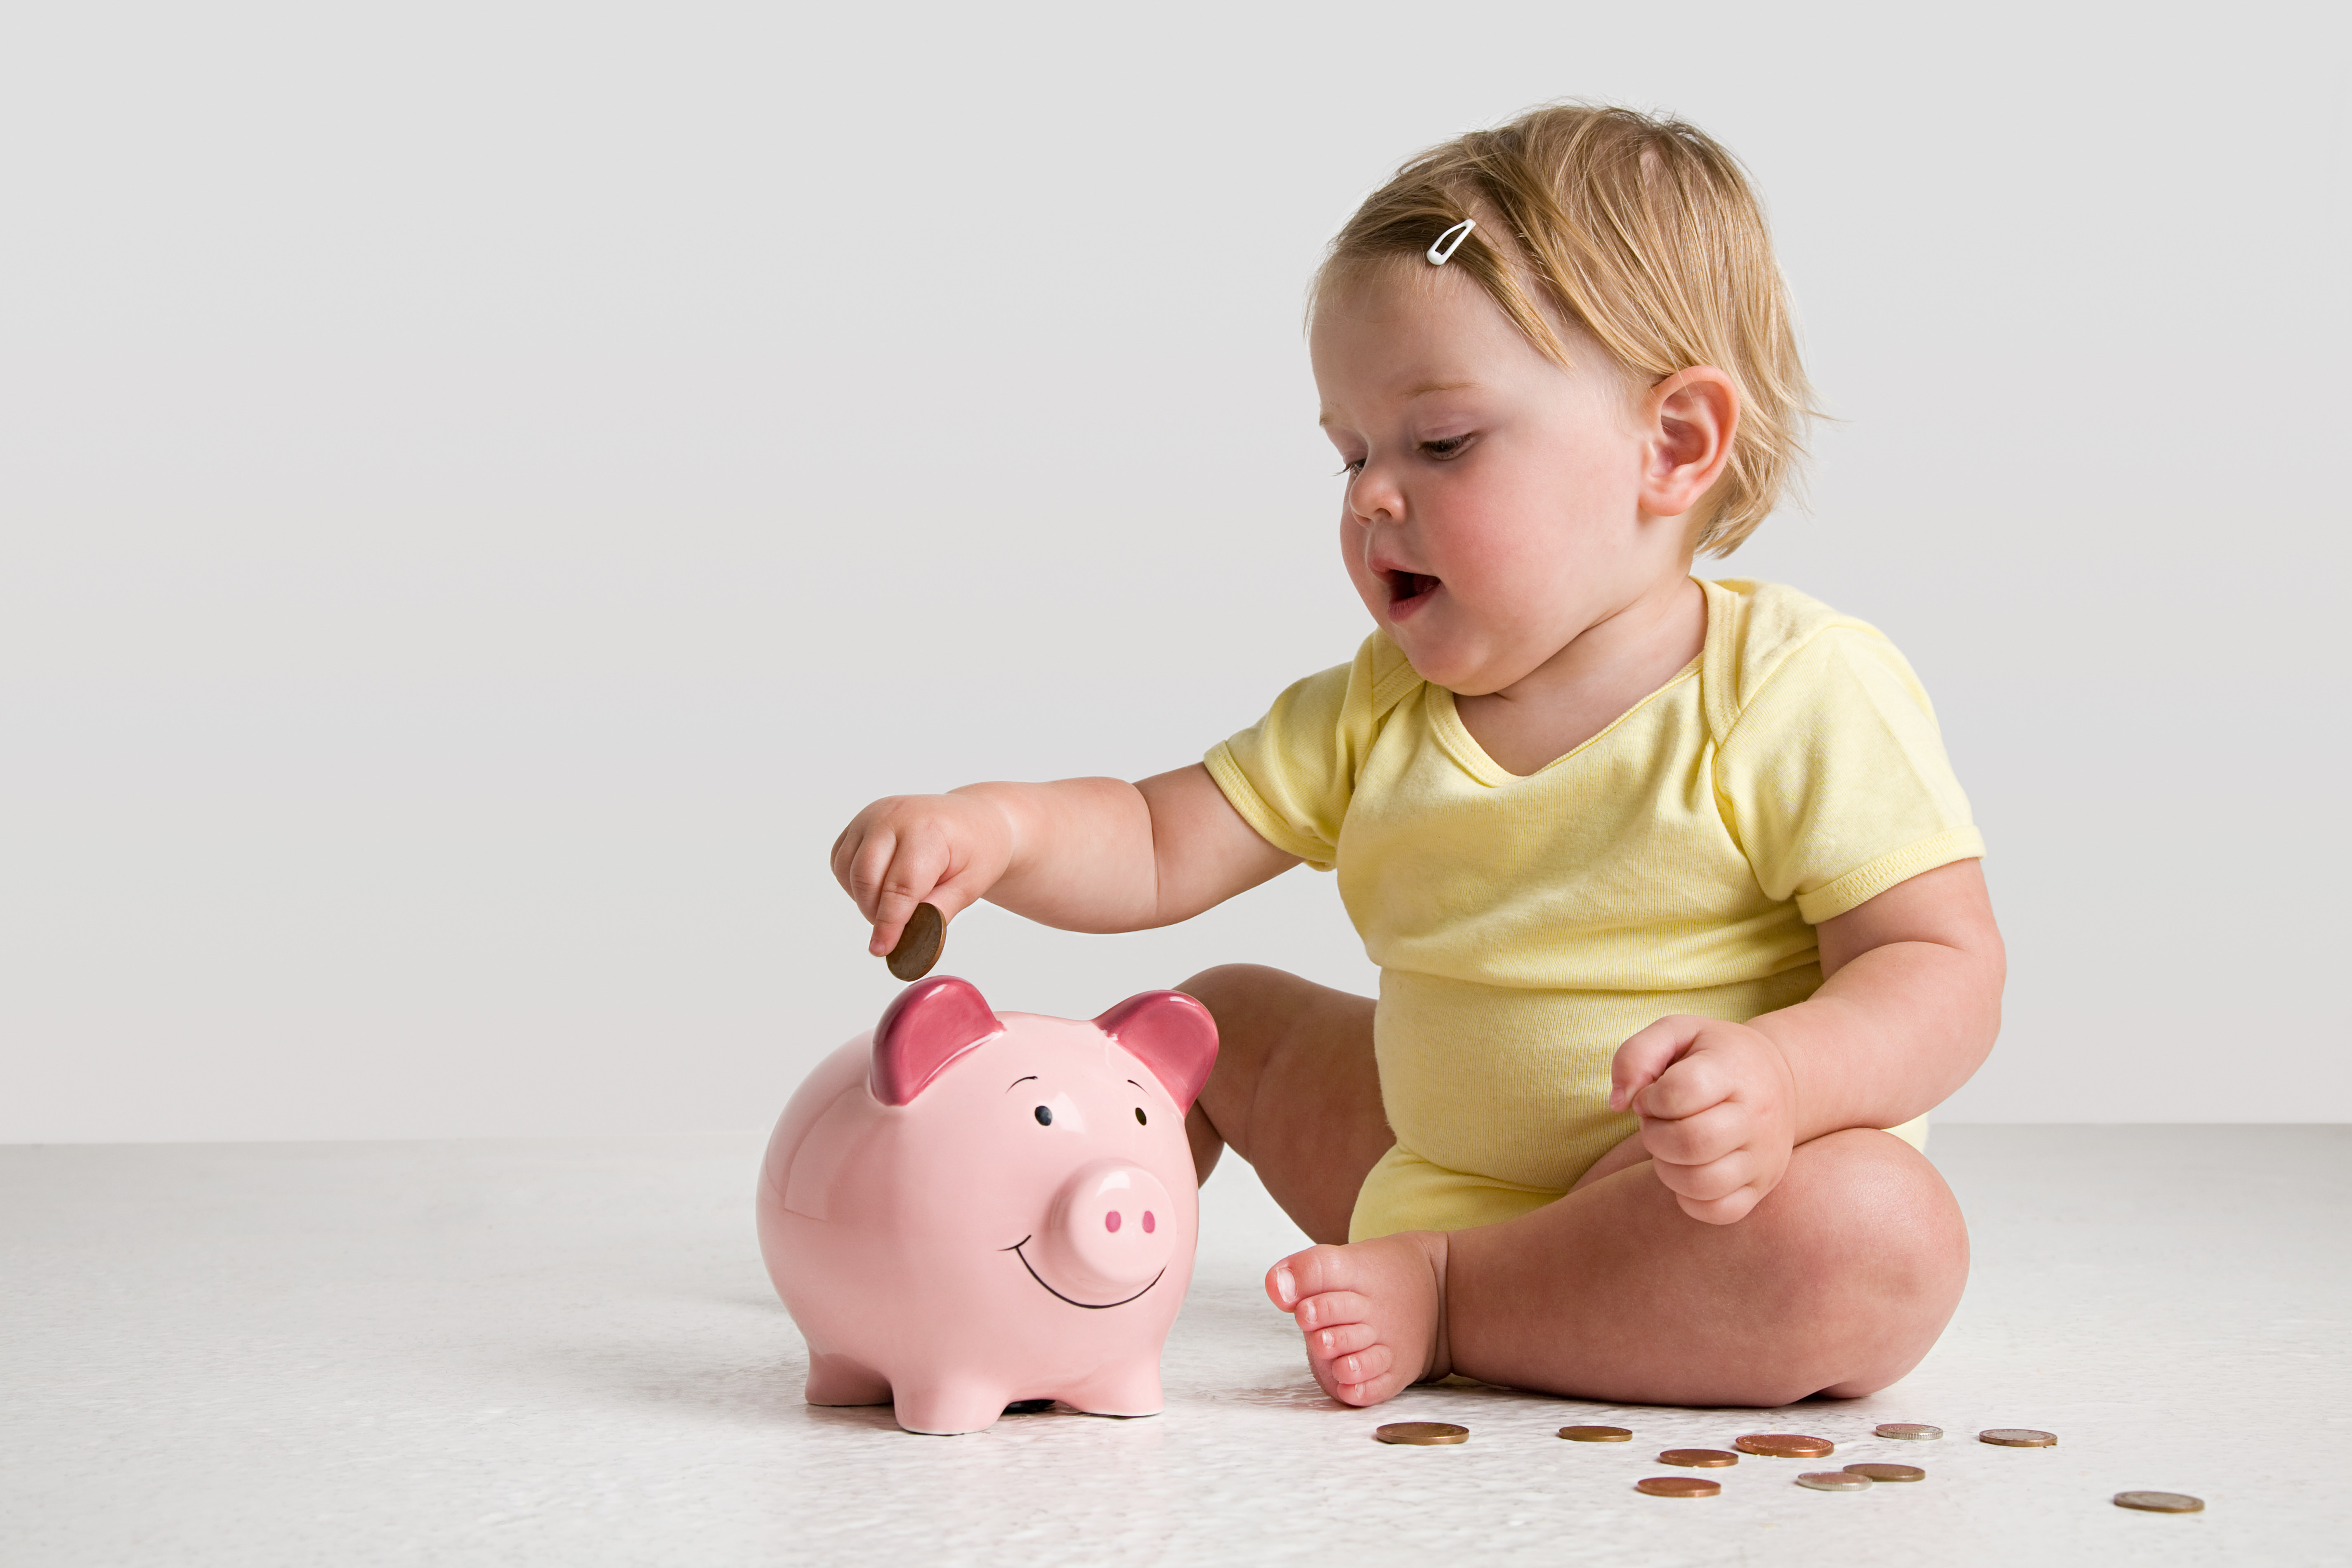 How to Budget for a Baby: Tips to Save Money on Baby Items